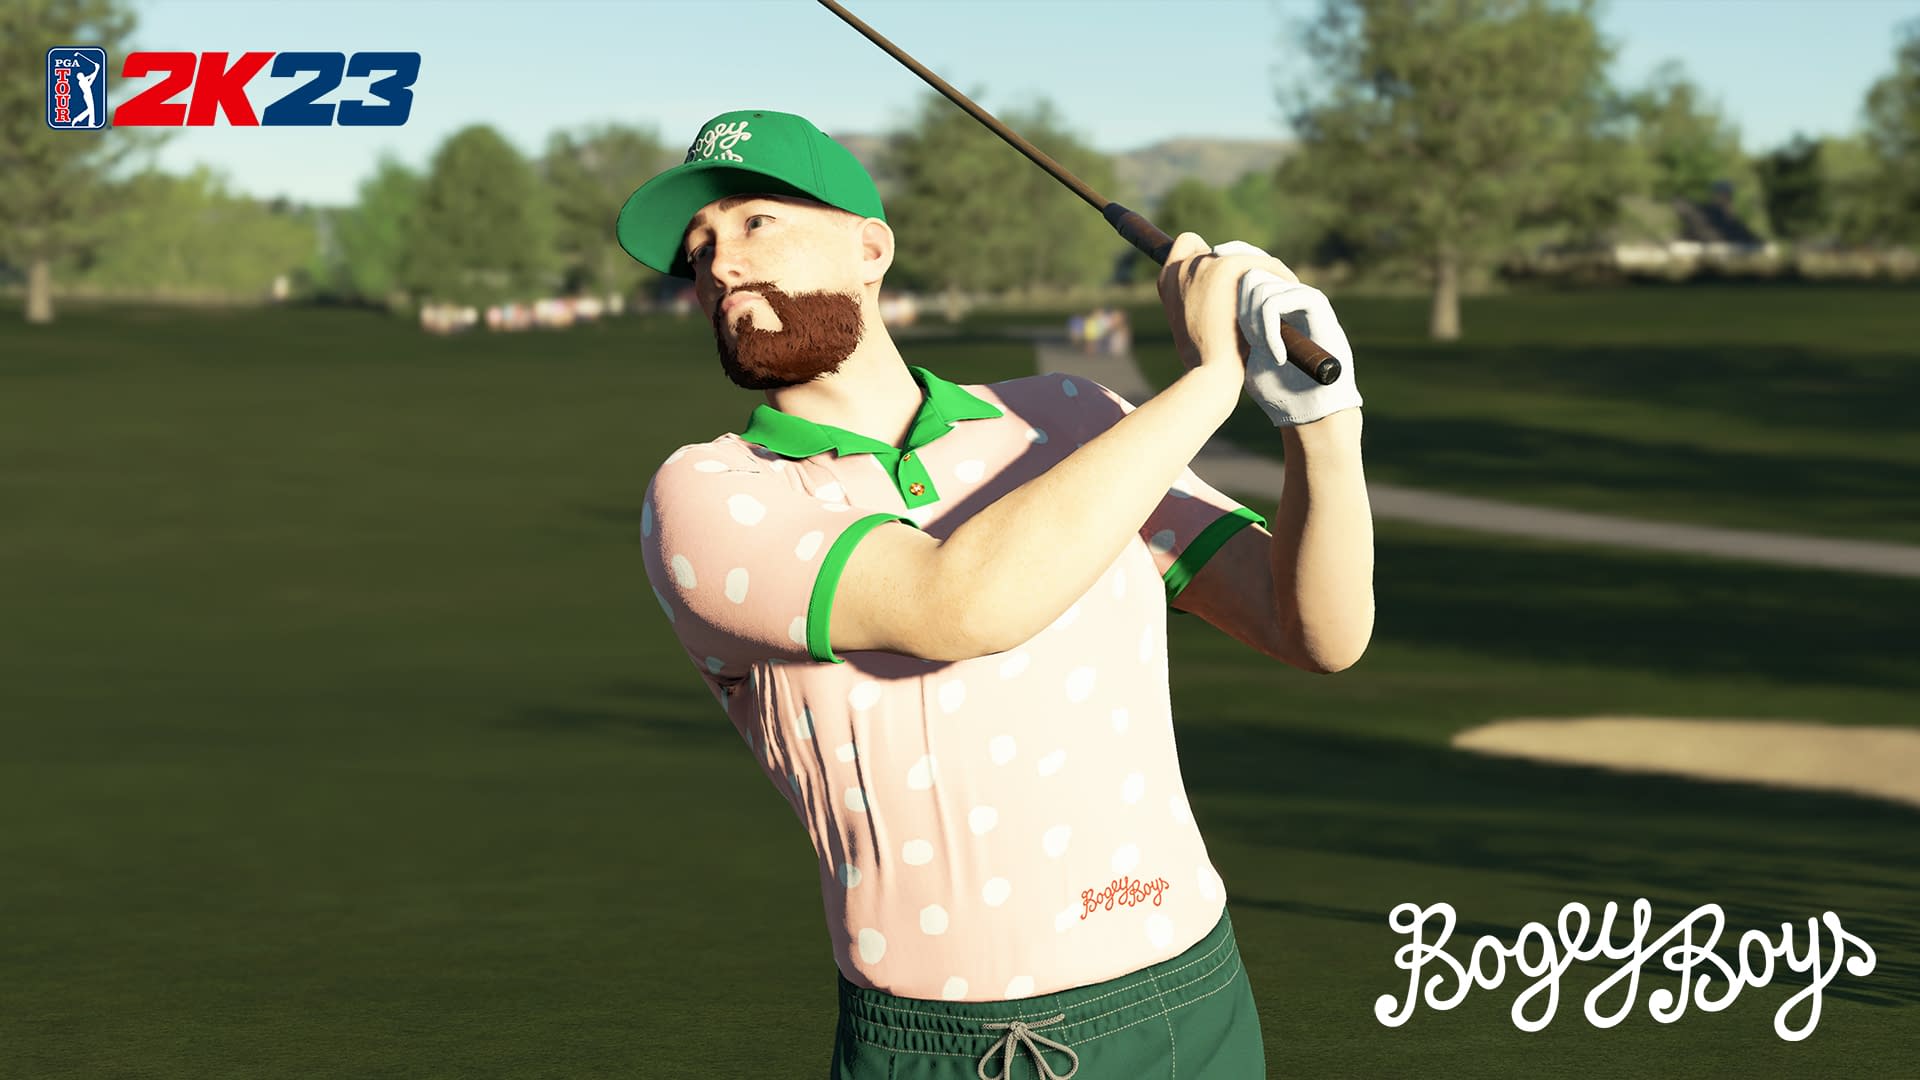 NBA Gear Available Now in PGA Tour 2K23 - Operation Sports